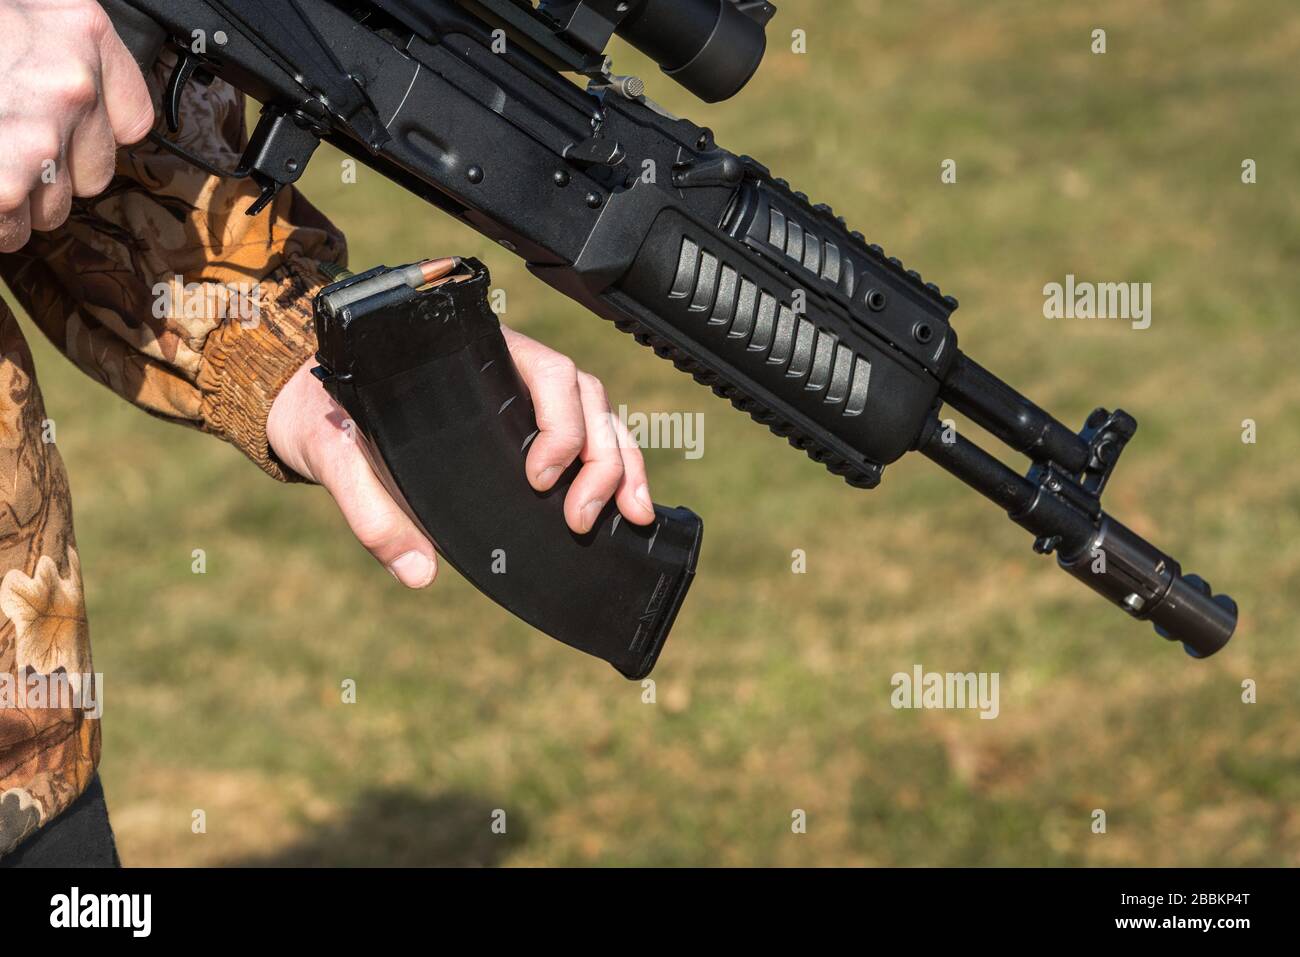 A man is holding a rifle magazine camouflage clothes Stock Photo